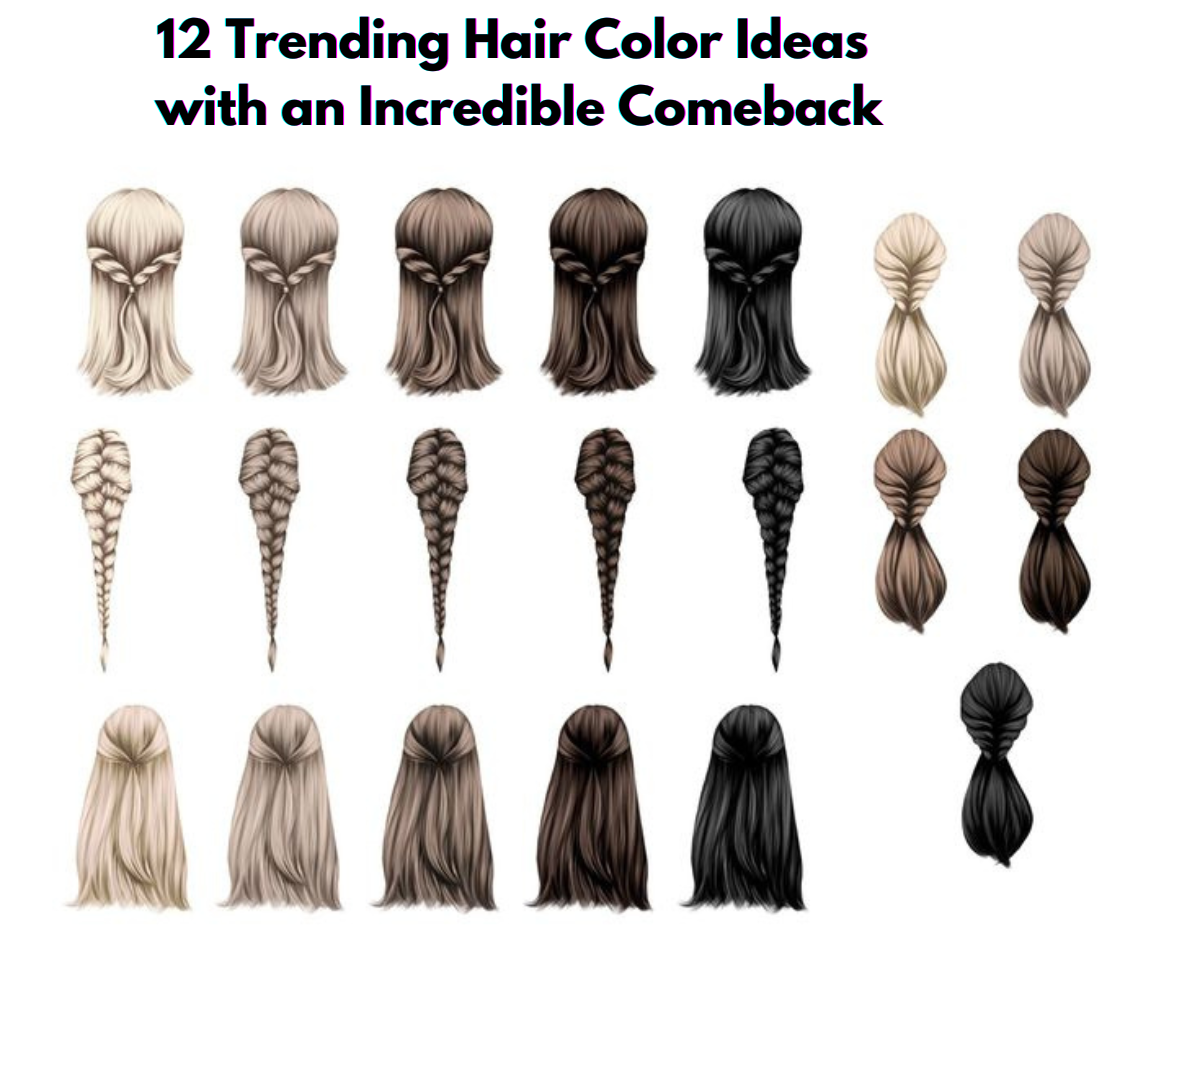 12 Trending Hair Color Ideas with an Incredible Comeback